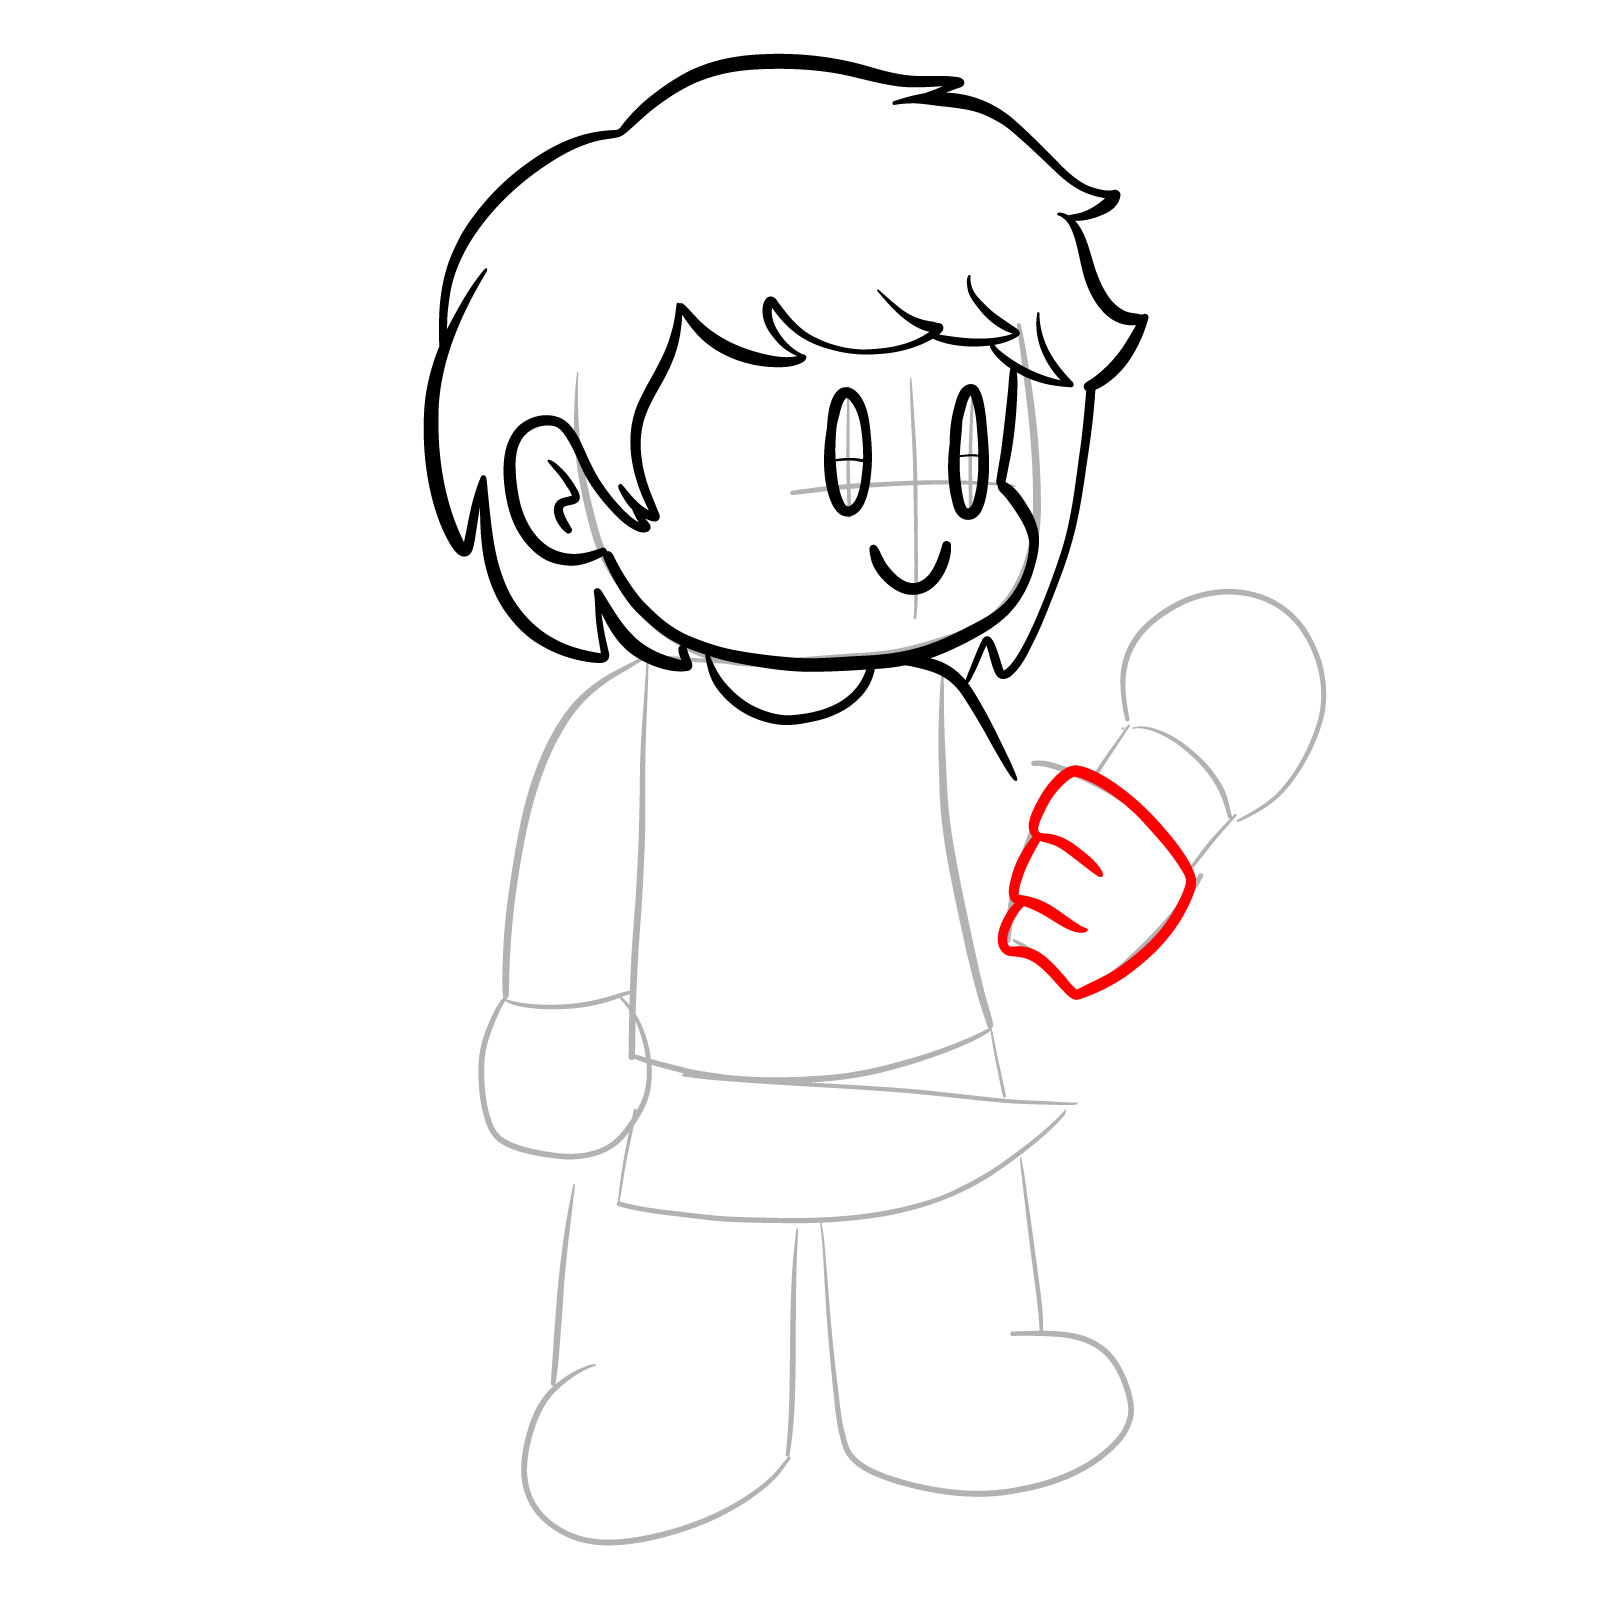 How to draw Chara from FNF - step 14